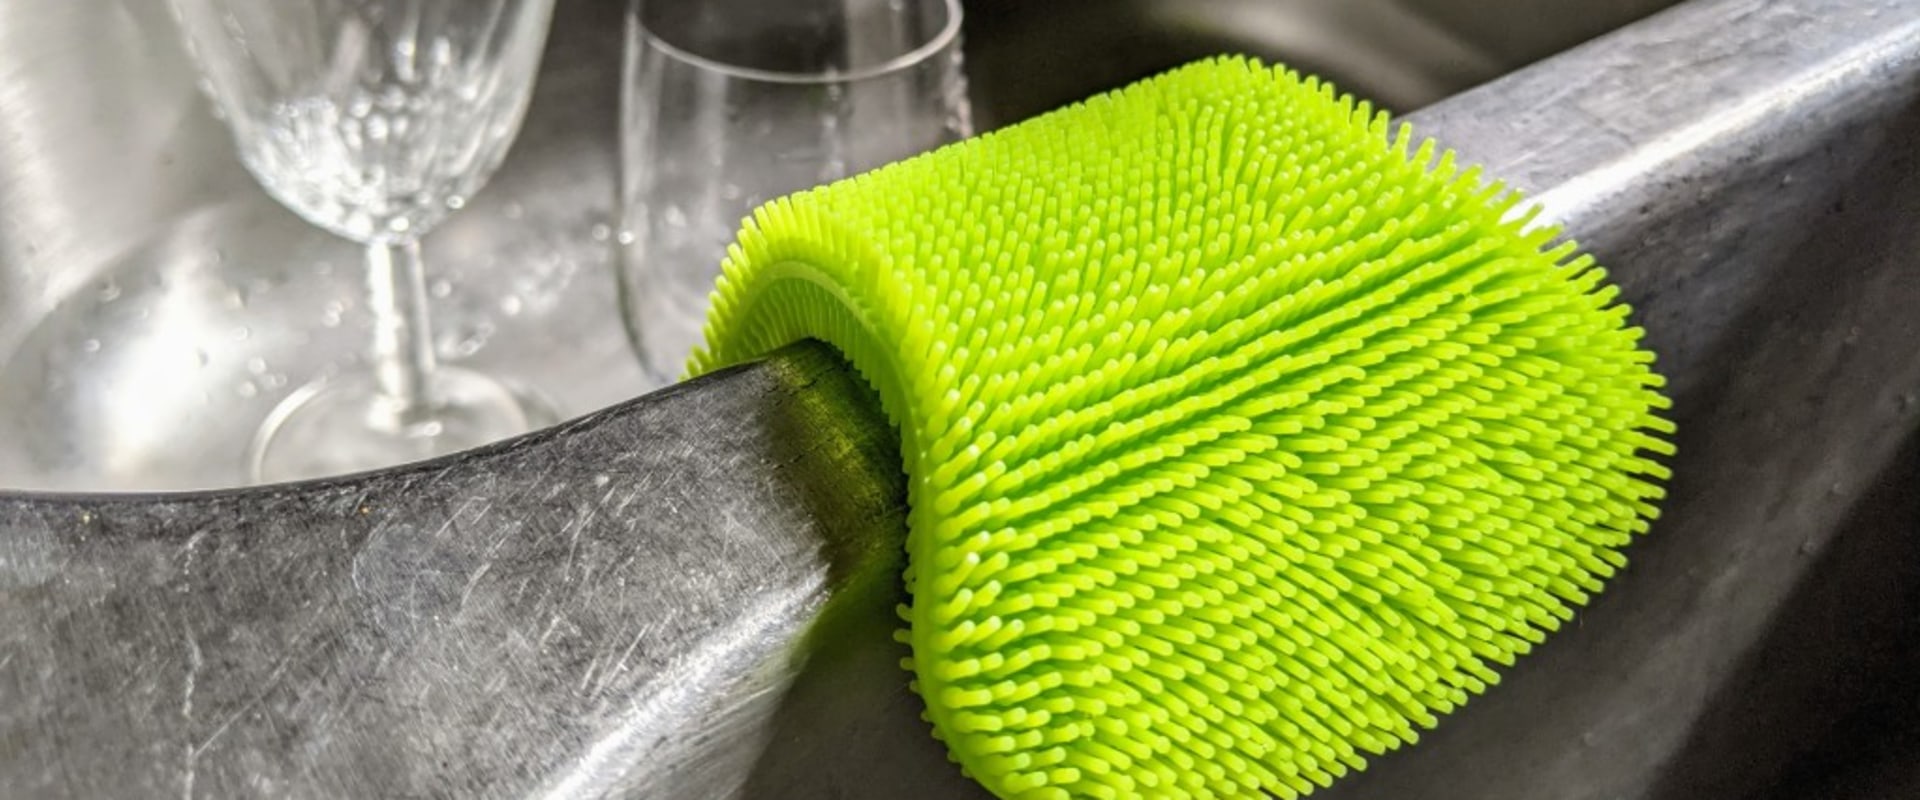 Clean Cloths and Sponges: An In-Depth Look at Cleaning Supplies